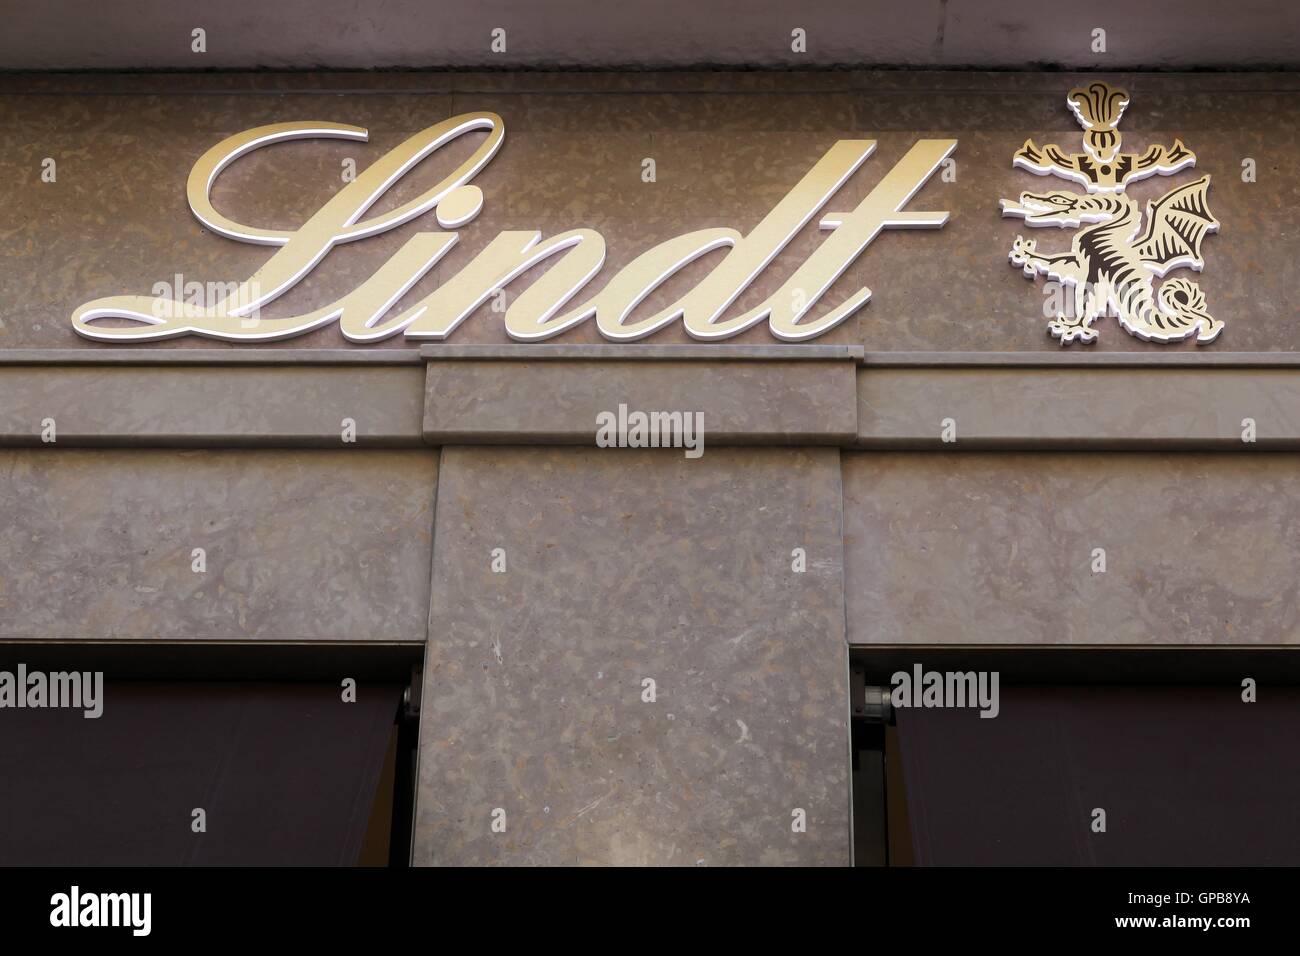 Lindt logo on a wall. Lindt is a Swiss chocolatier and confectionery company Stock Photo